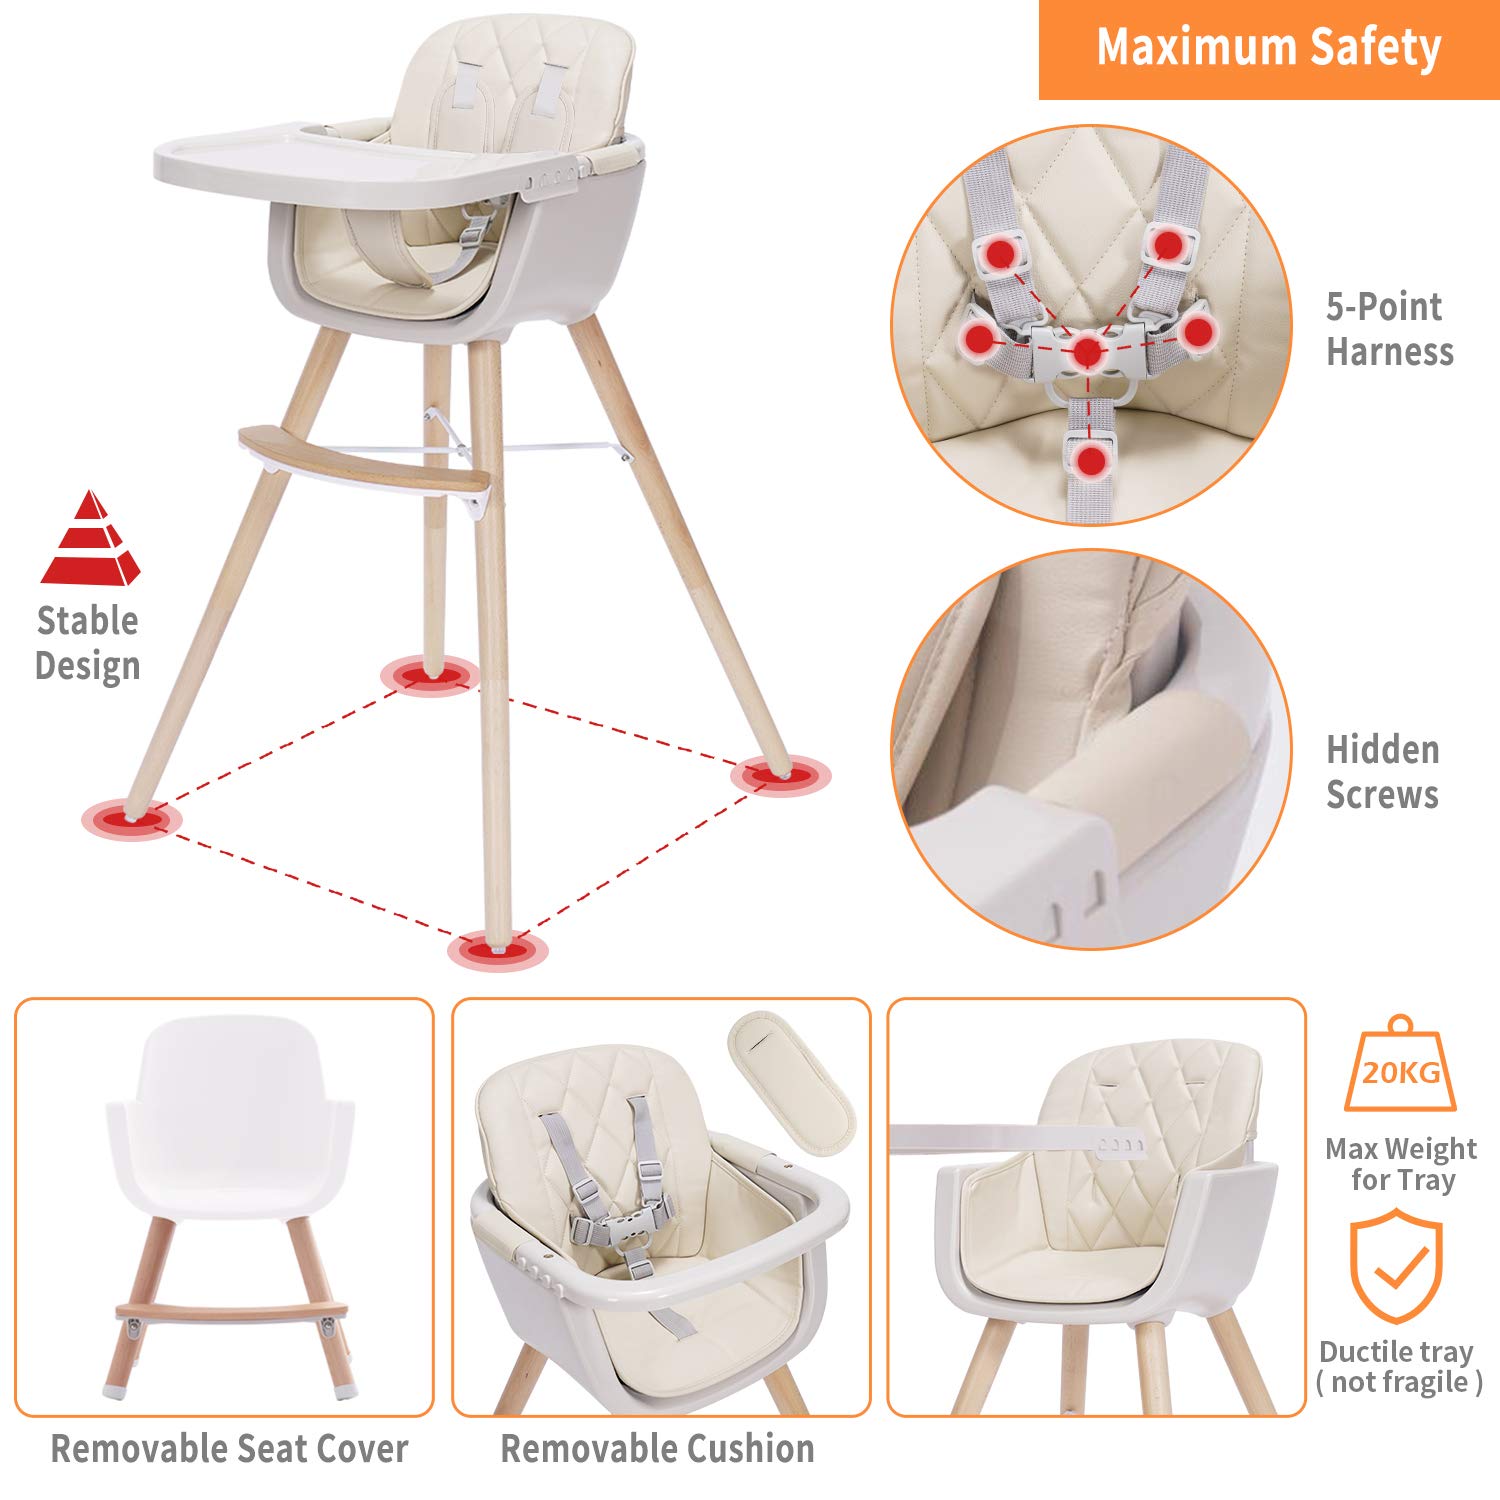 3-in-1 Convertible Wooden High Chair,Baby High Chair with Adjustable Legs & Dishwasher Safe Tray, Made of Sleek Hardwood & Premium Leatherette, Cream Color